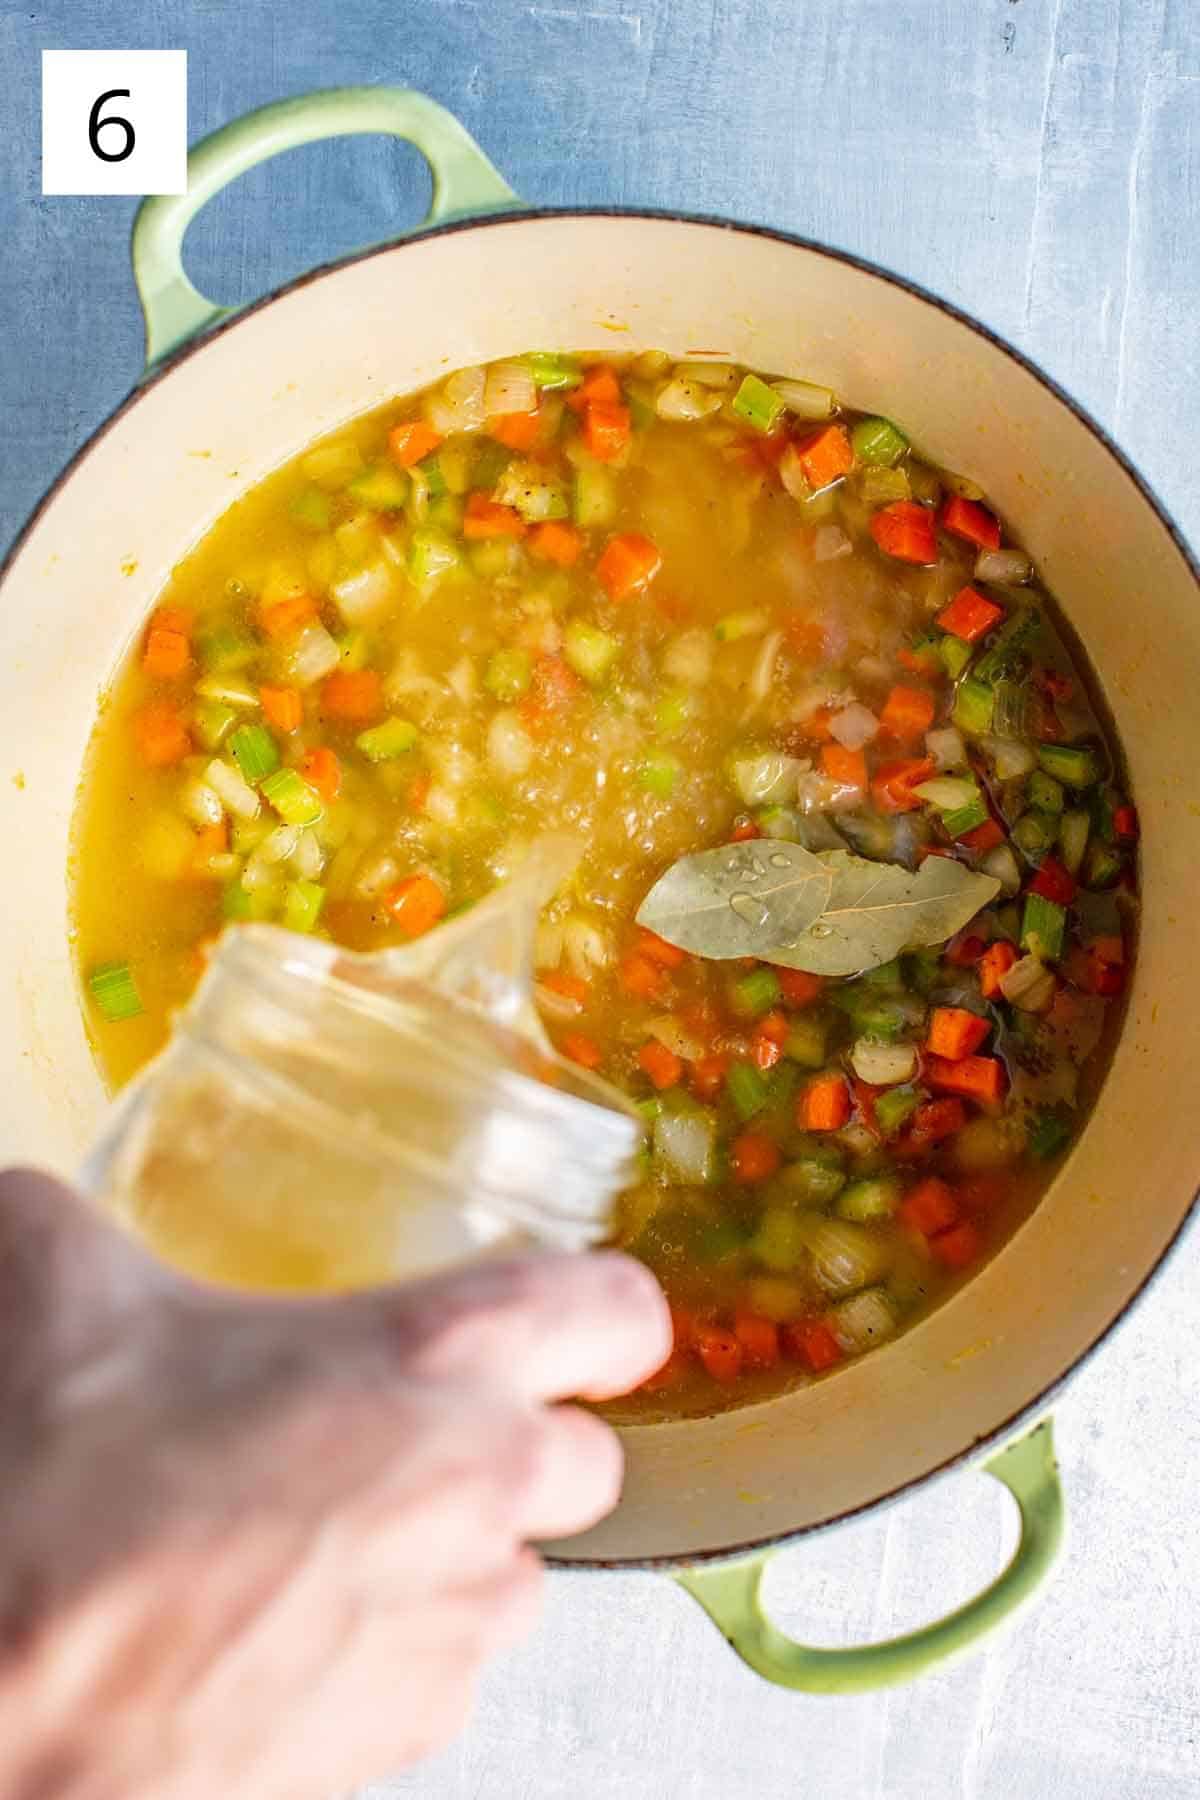 Adding broth to a pot of vegetables.